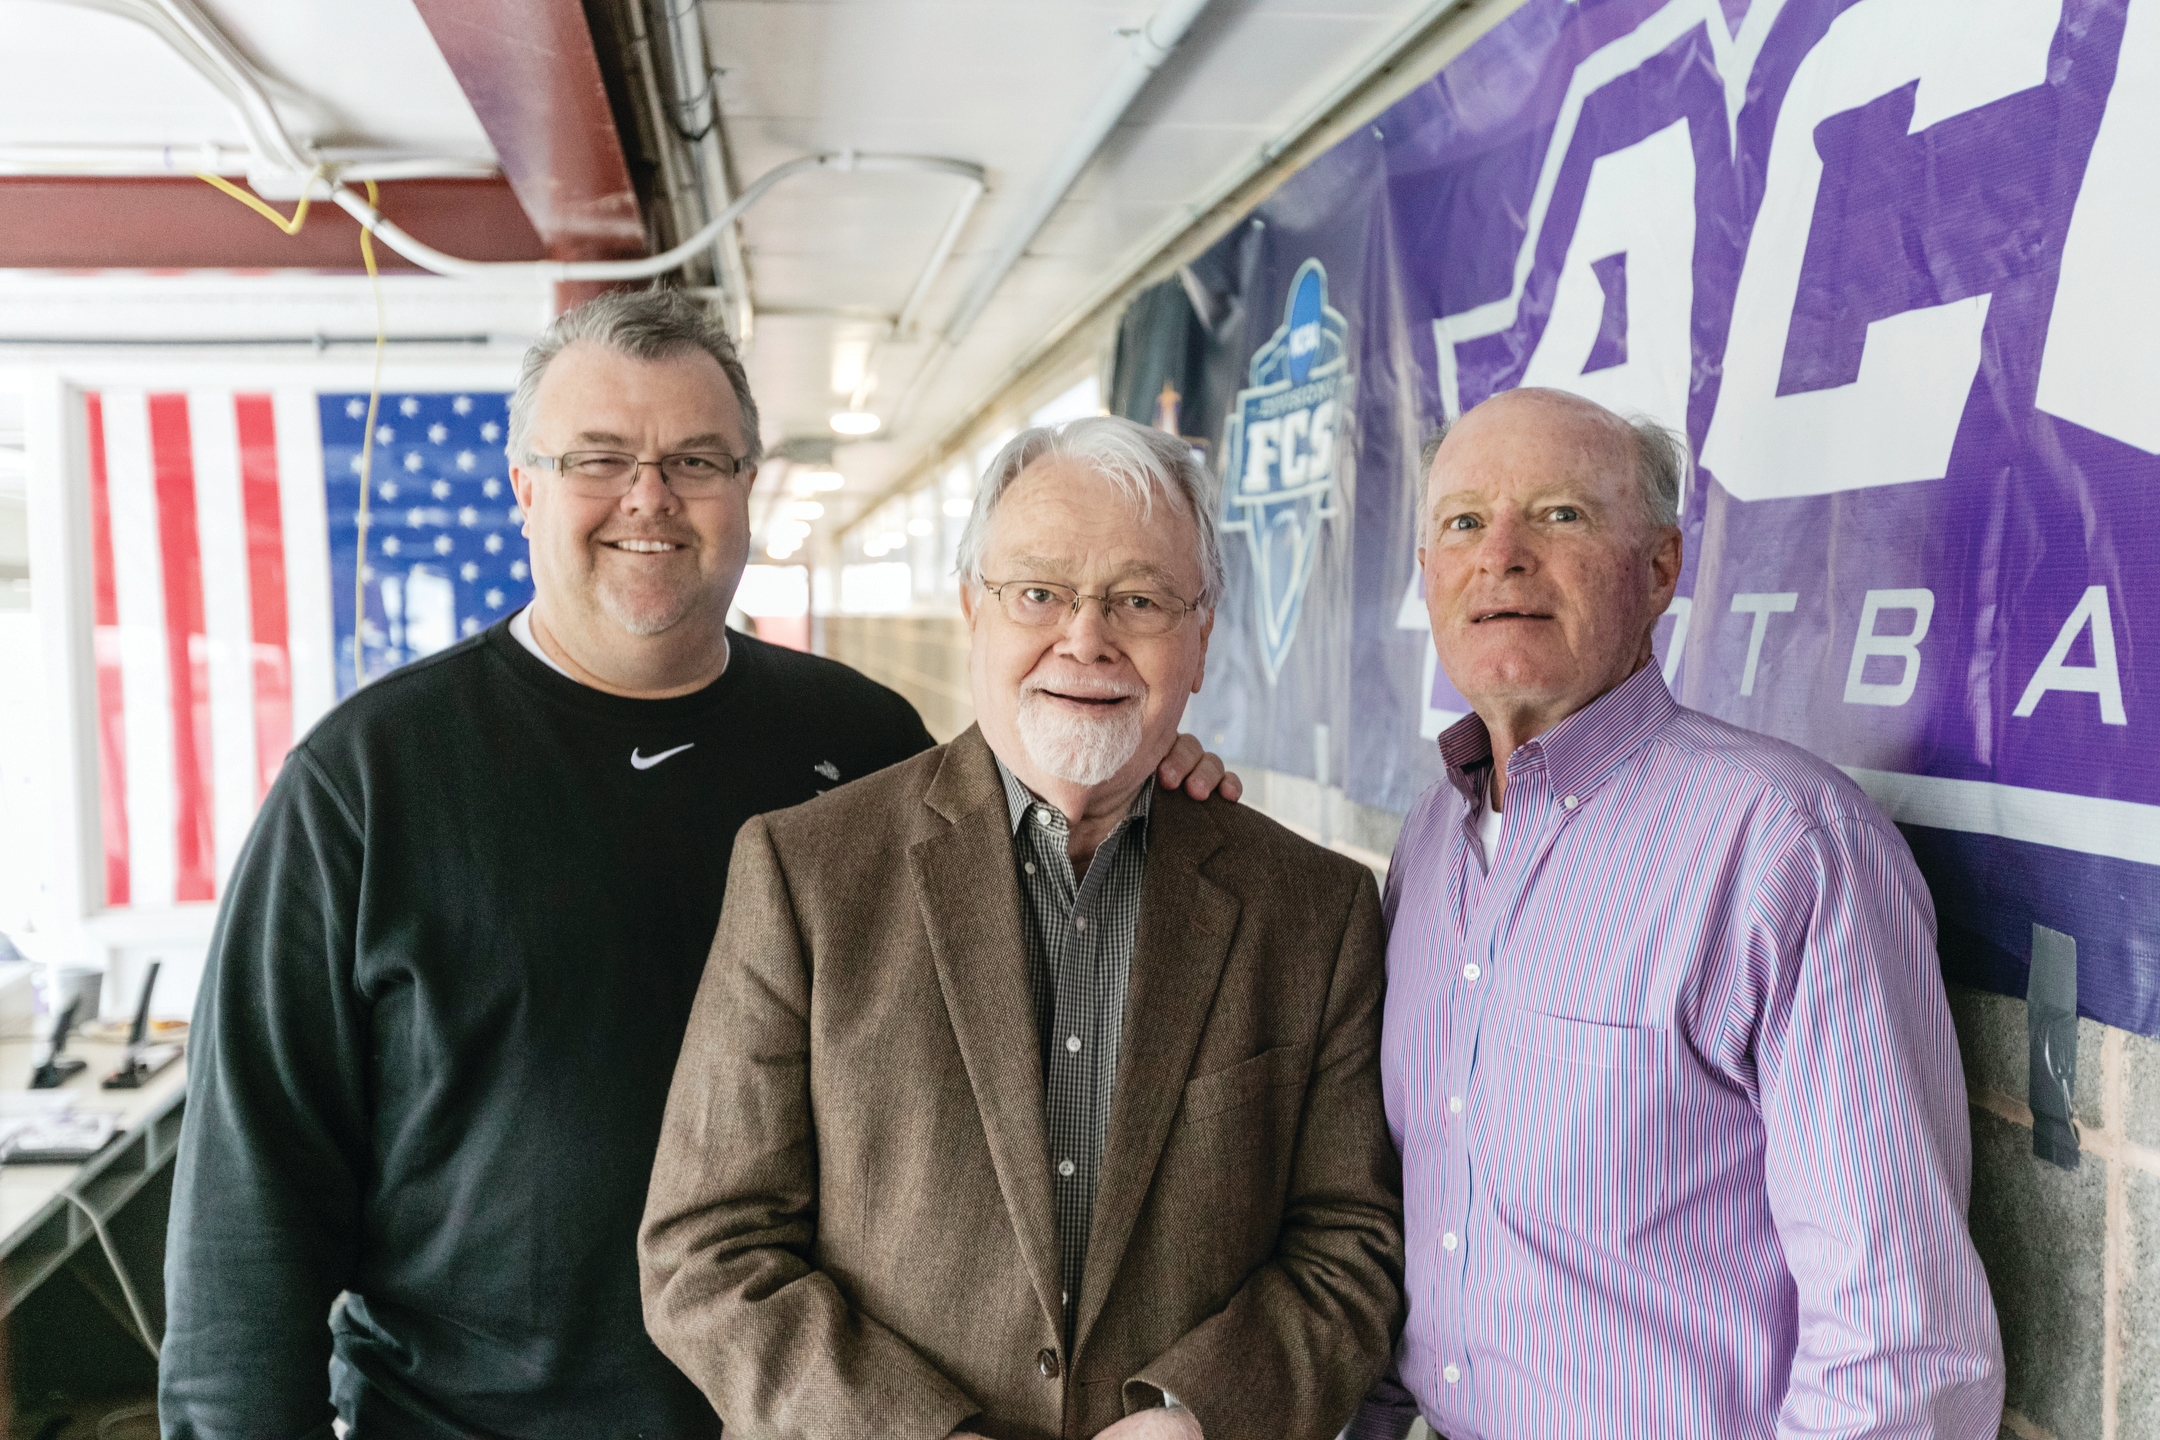 Three of the seven sports information directors in Wildcat history gathered at ACU’s last football game in Shotwell Stadium on Nov. 5, 2016: (from left) Lance Fleming (’92), Dr. Charlie Marler (’55) and Garner Roberts (’71). Marler (1958-63) was the first, Roberts (1973-98) the fourth and Fleming the fifth (1998-2019).